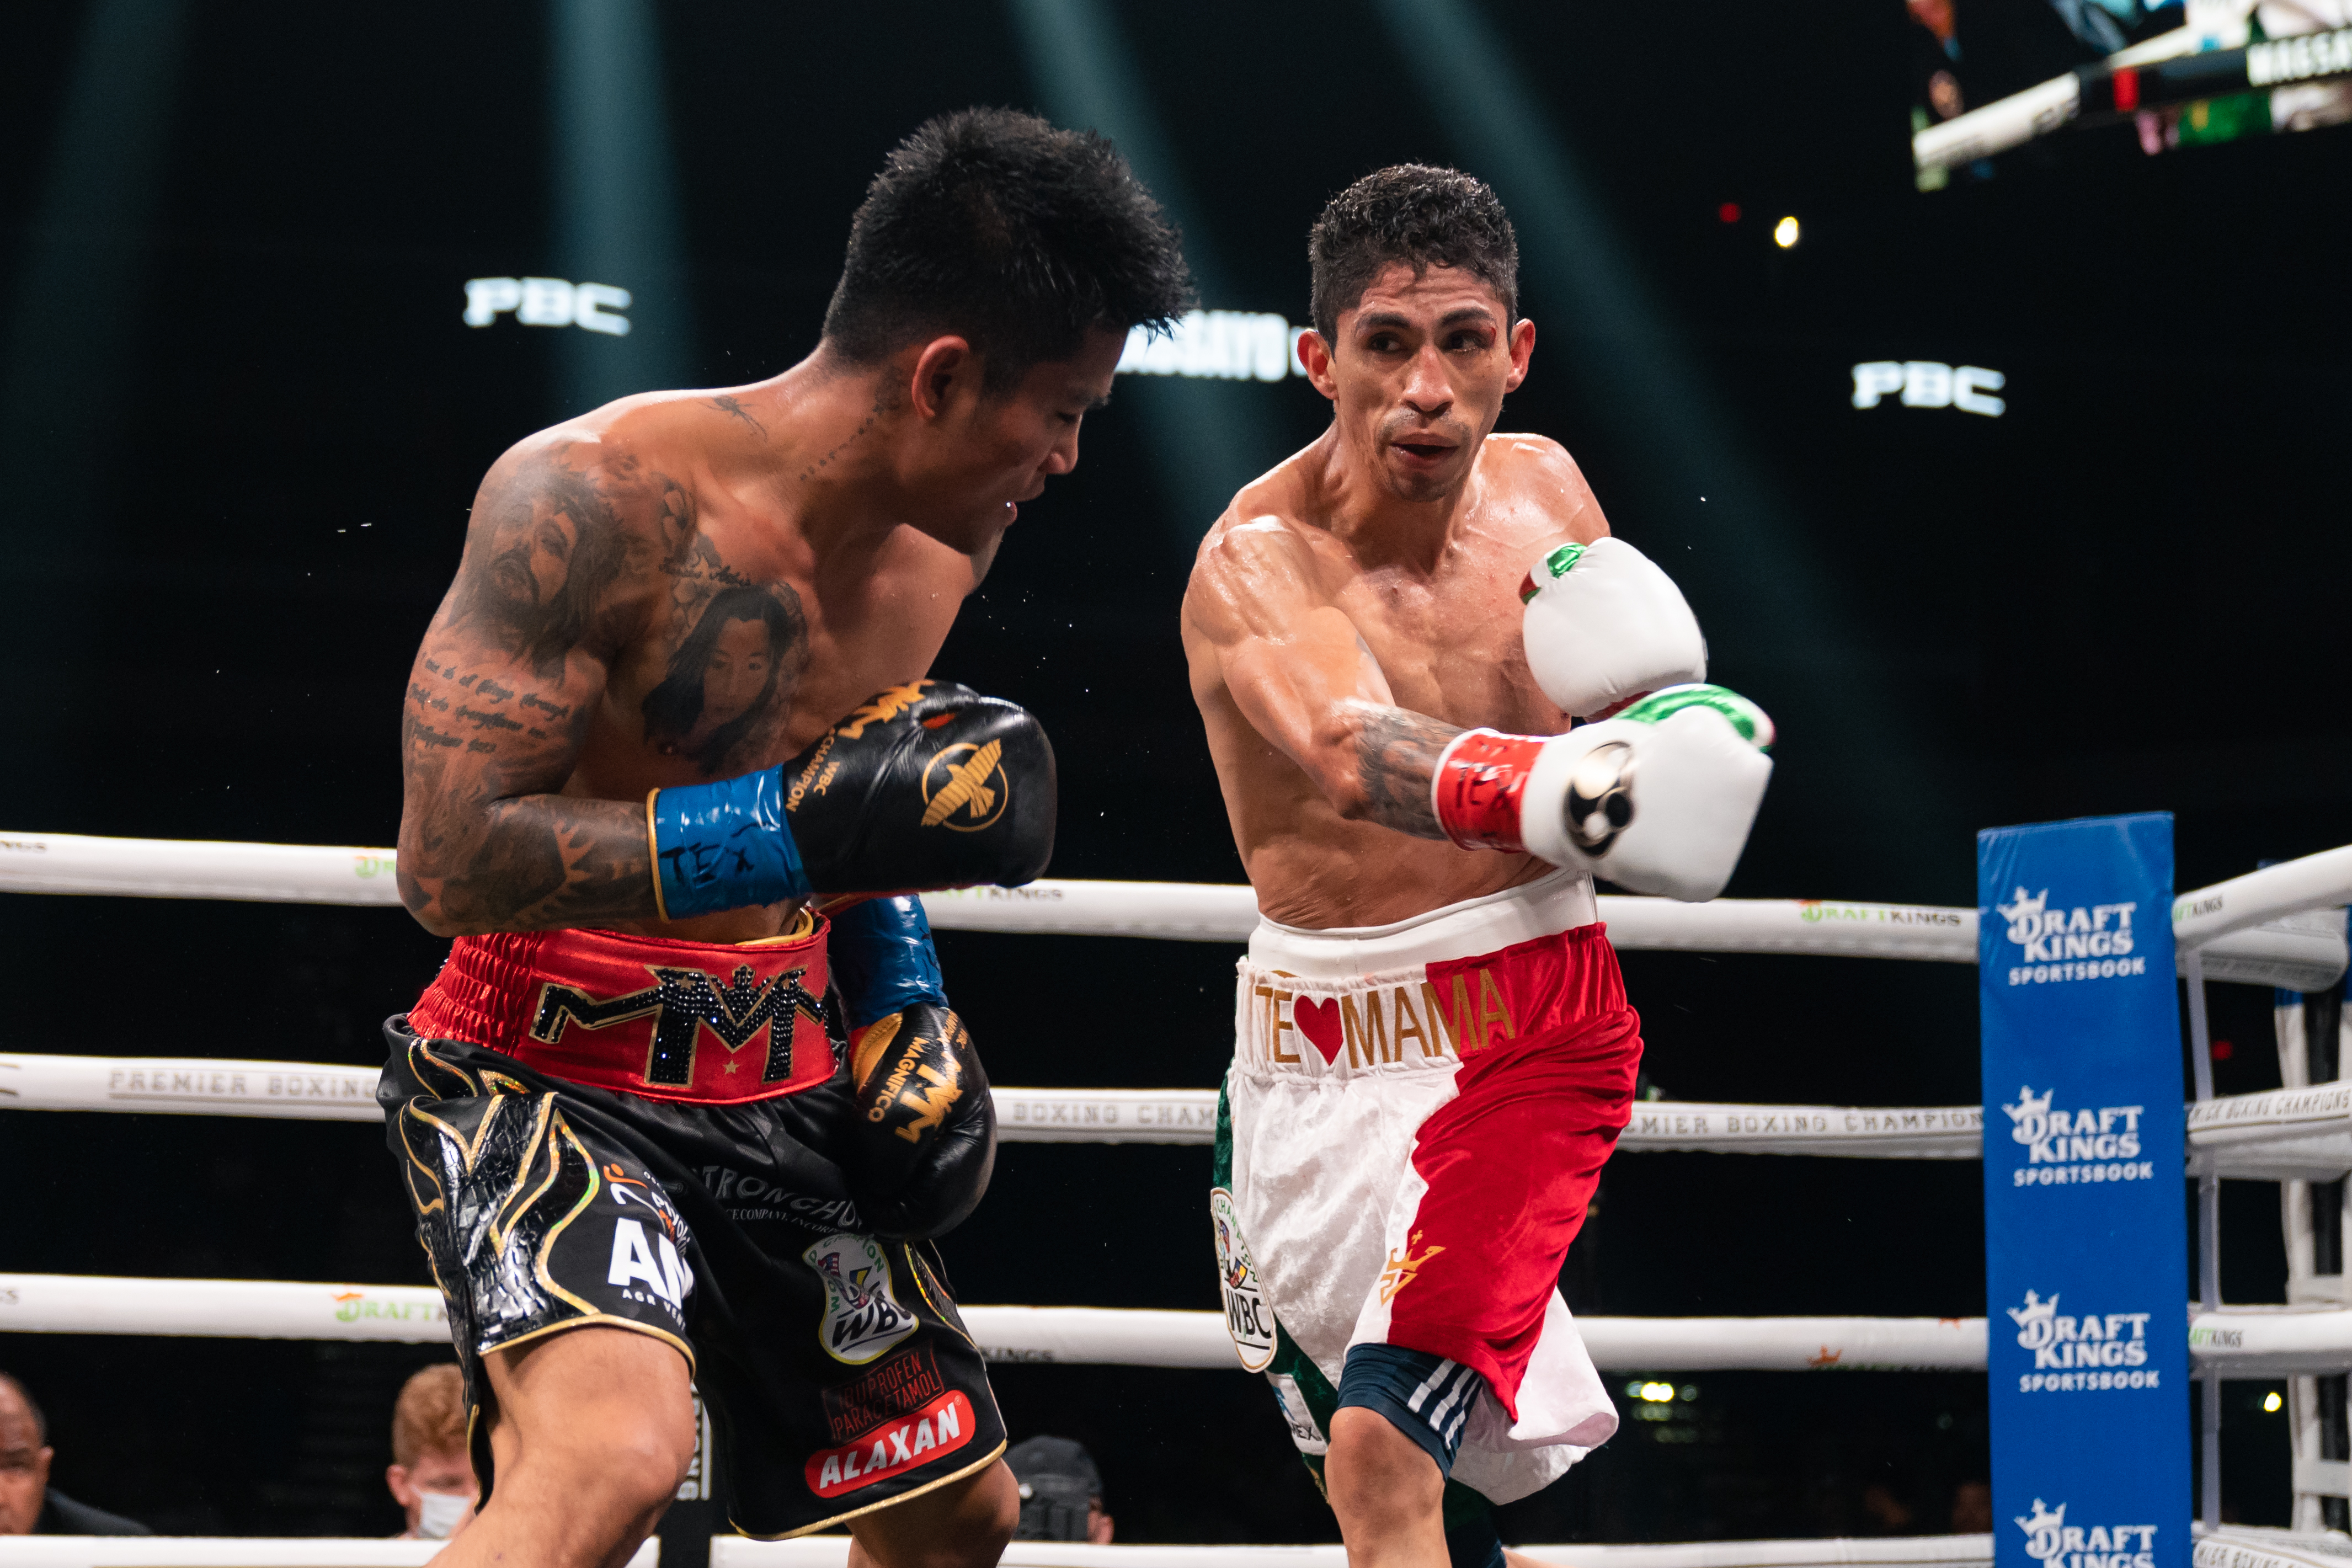 Rey Vargas grabbed a WBC title and has risen up the ranks at featherweight